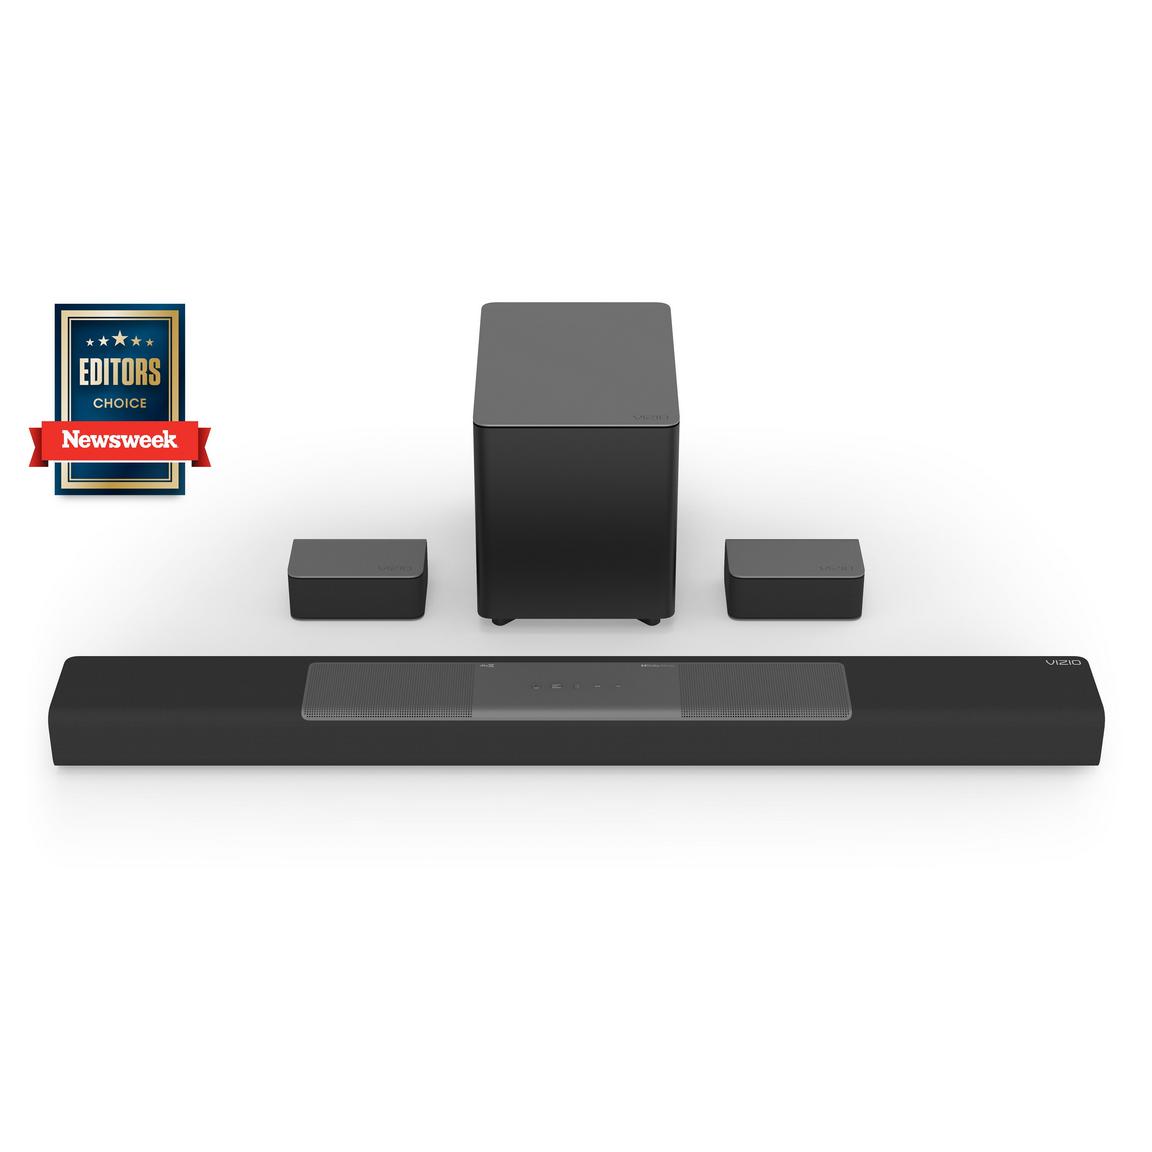 M-Series 5.1.2 Sound Bar and Home Theater Sound System with Dolby Atmos and DTSX Black - VIZIO M512A-H6